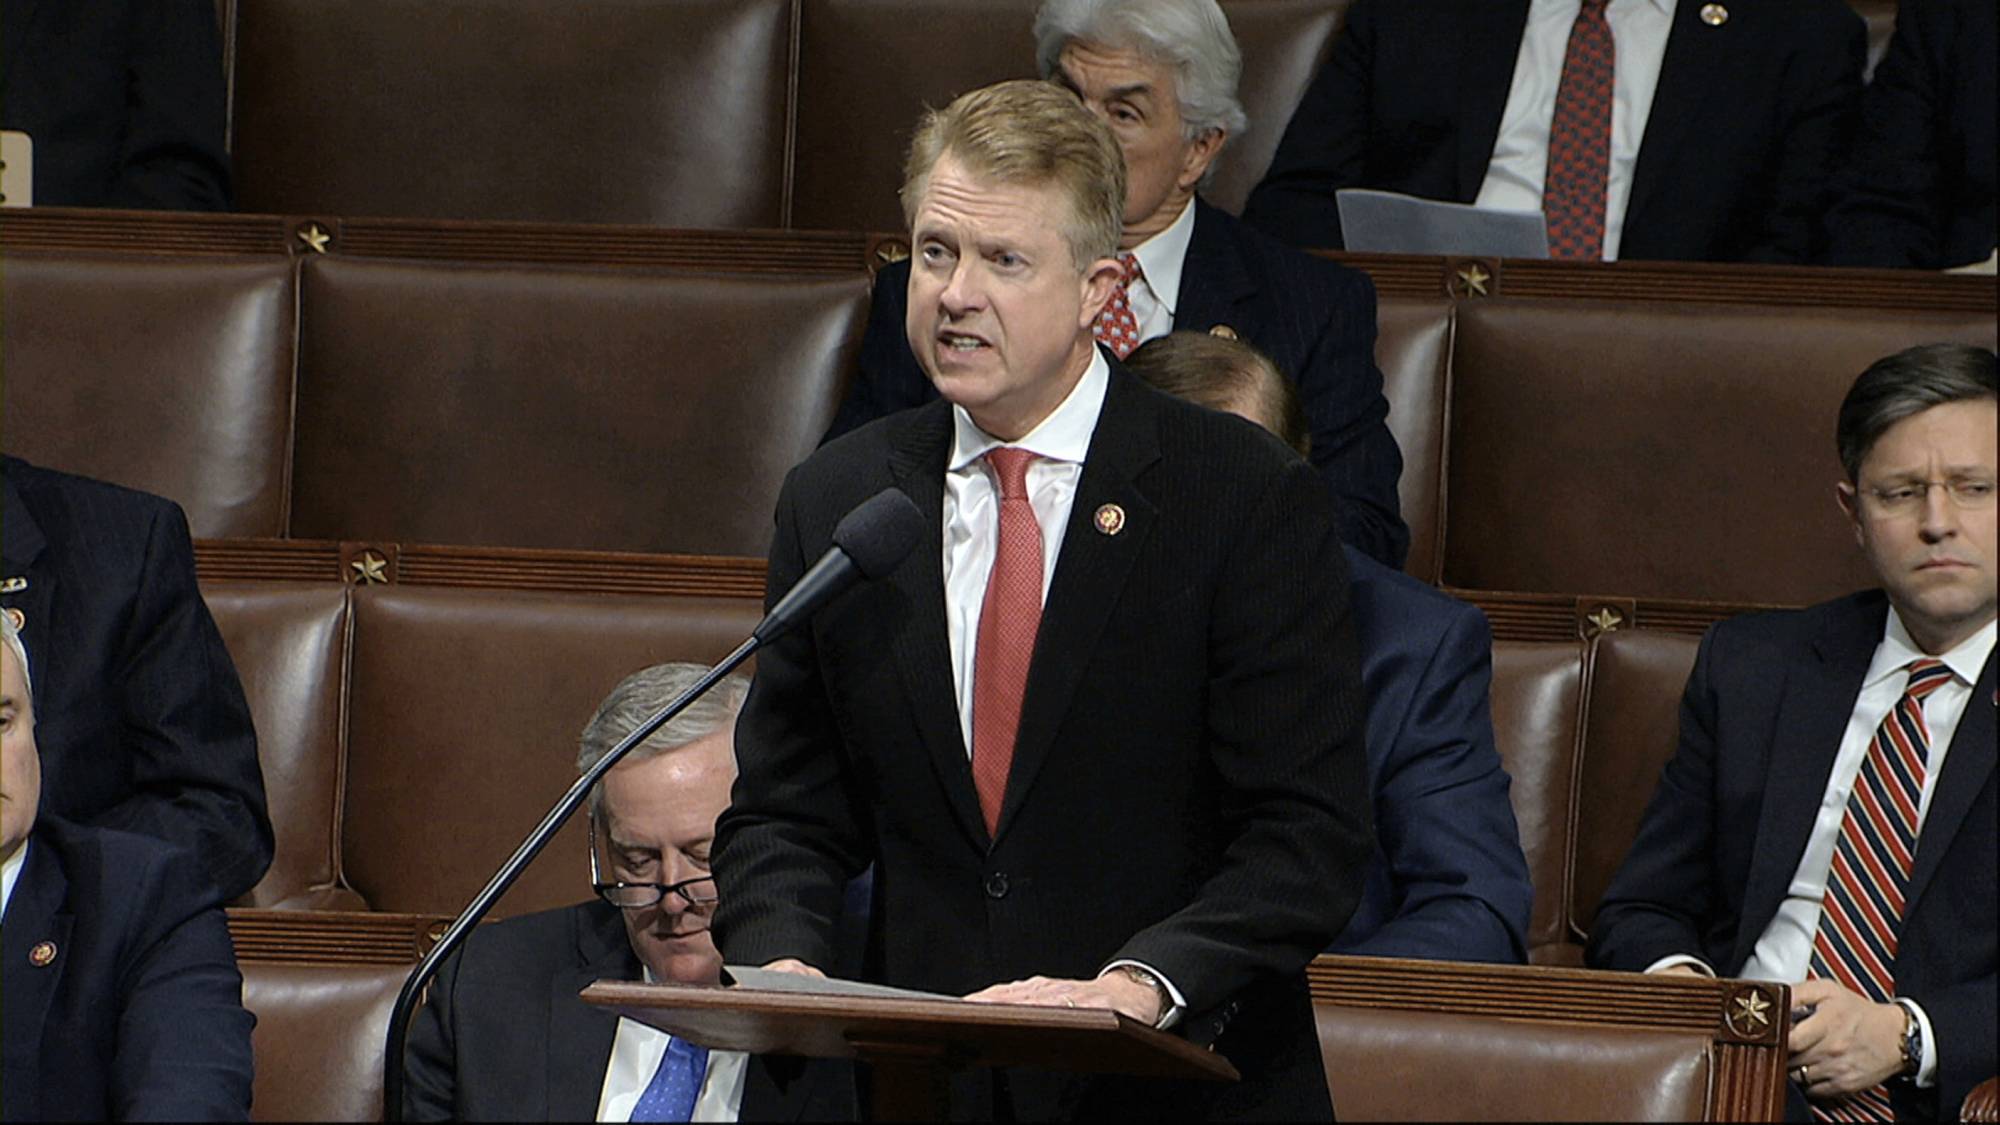 FILE - In this Dec. 18, 2019, file photo Rep. Roger Marshall, R-Kan., speaks as the House of Representatives debates the articles of impeachment against President Donald Trump at the Capitol in Washington. Marshall, who is also a doctor, says he is taking hydroxychloroquine that President Donald Trump has touted as a treatment for the coronavirus, adding he doesn't have COVID-19 but he's been taking the malaria drug to hold off the virus. (House Television via AP, File)